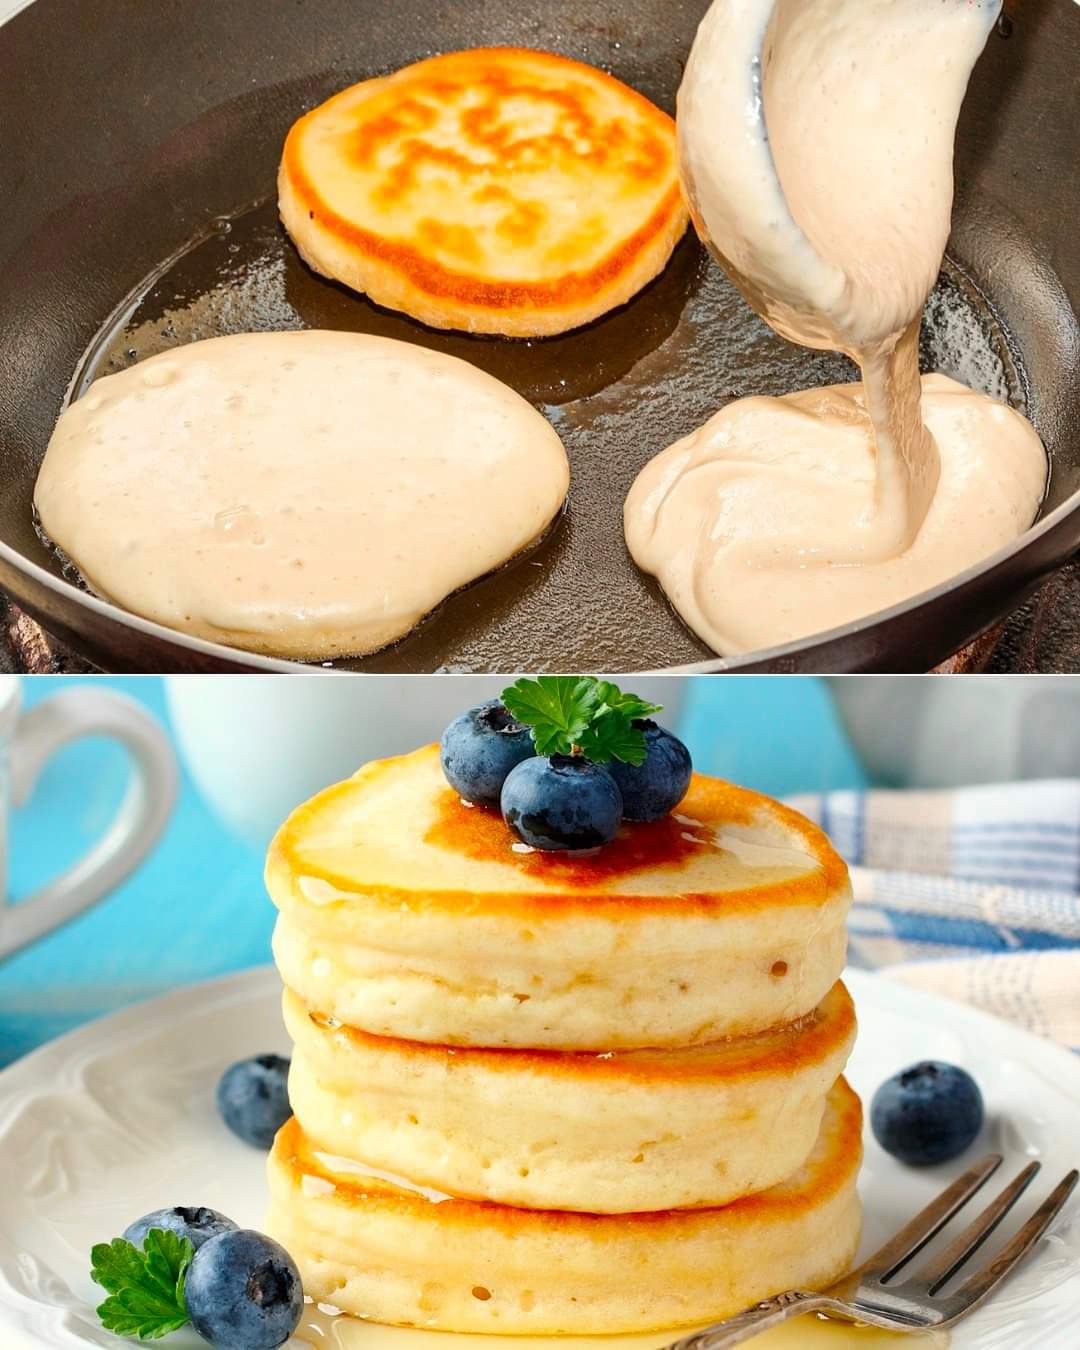 Silver Dollar Pancakes. Flour, sugar, 1 egg, milk and a pinch of baking powder. So fluffy and ready in 5 minutes! The easy recipe.